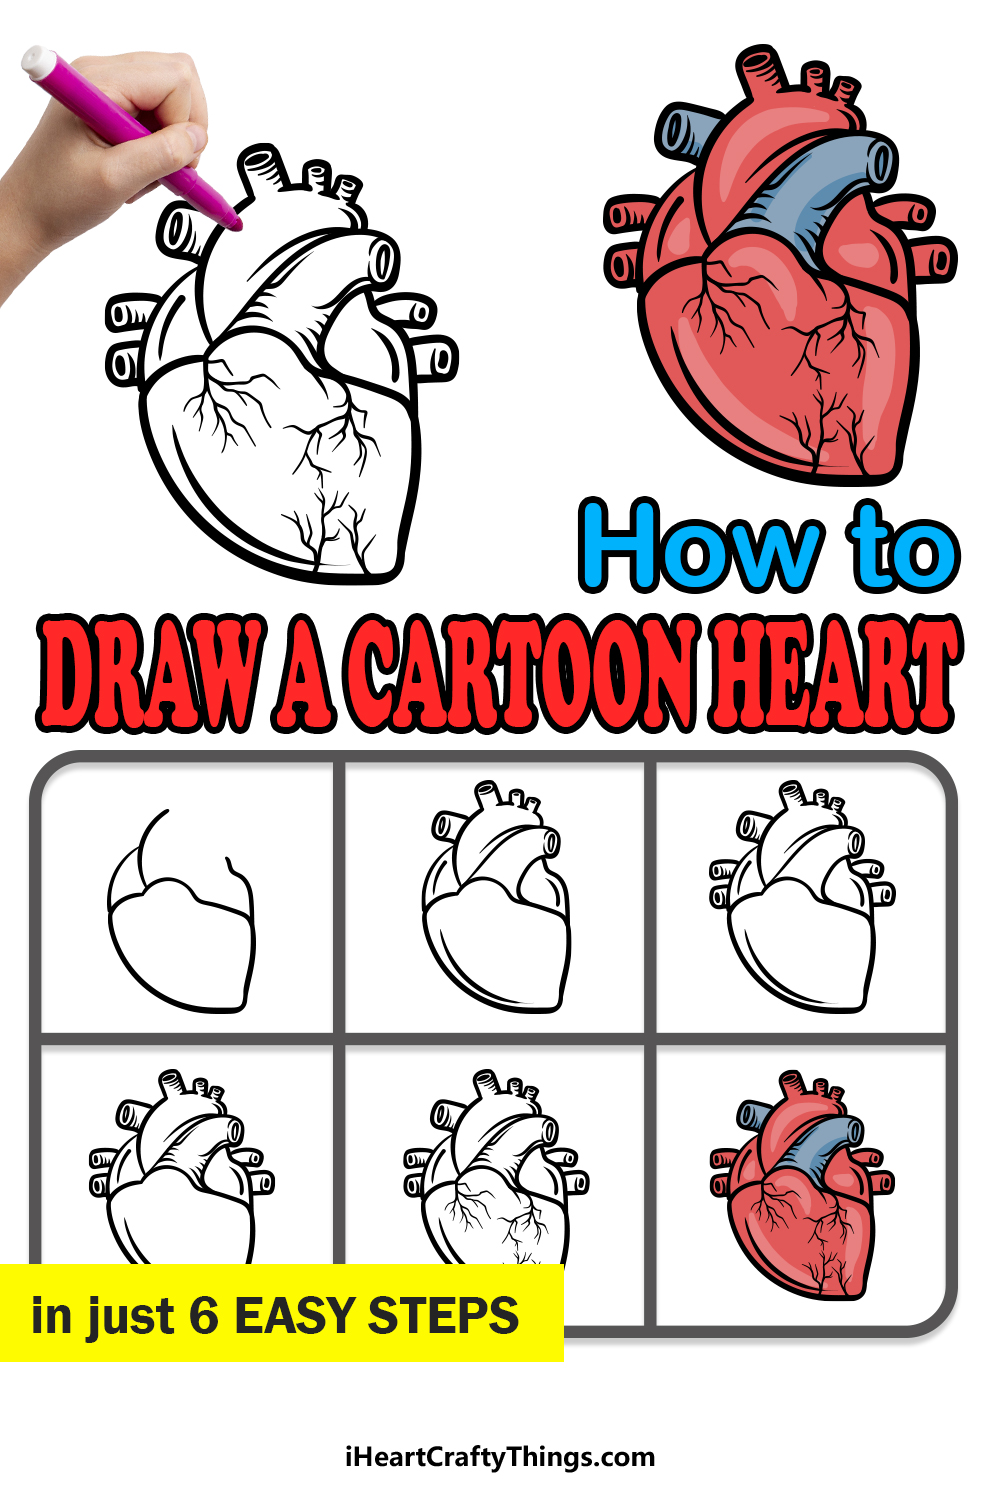 how to draw a cartoon heart in 6 easy steps